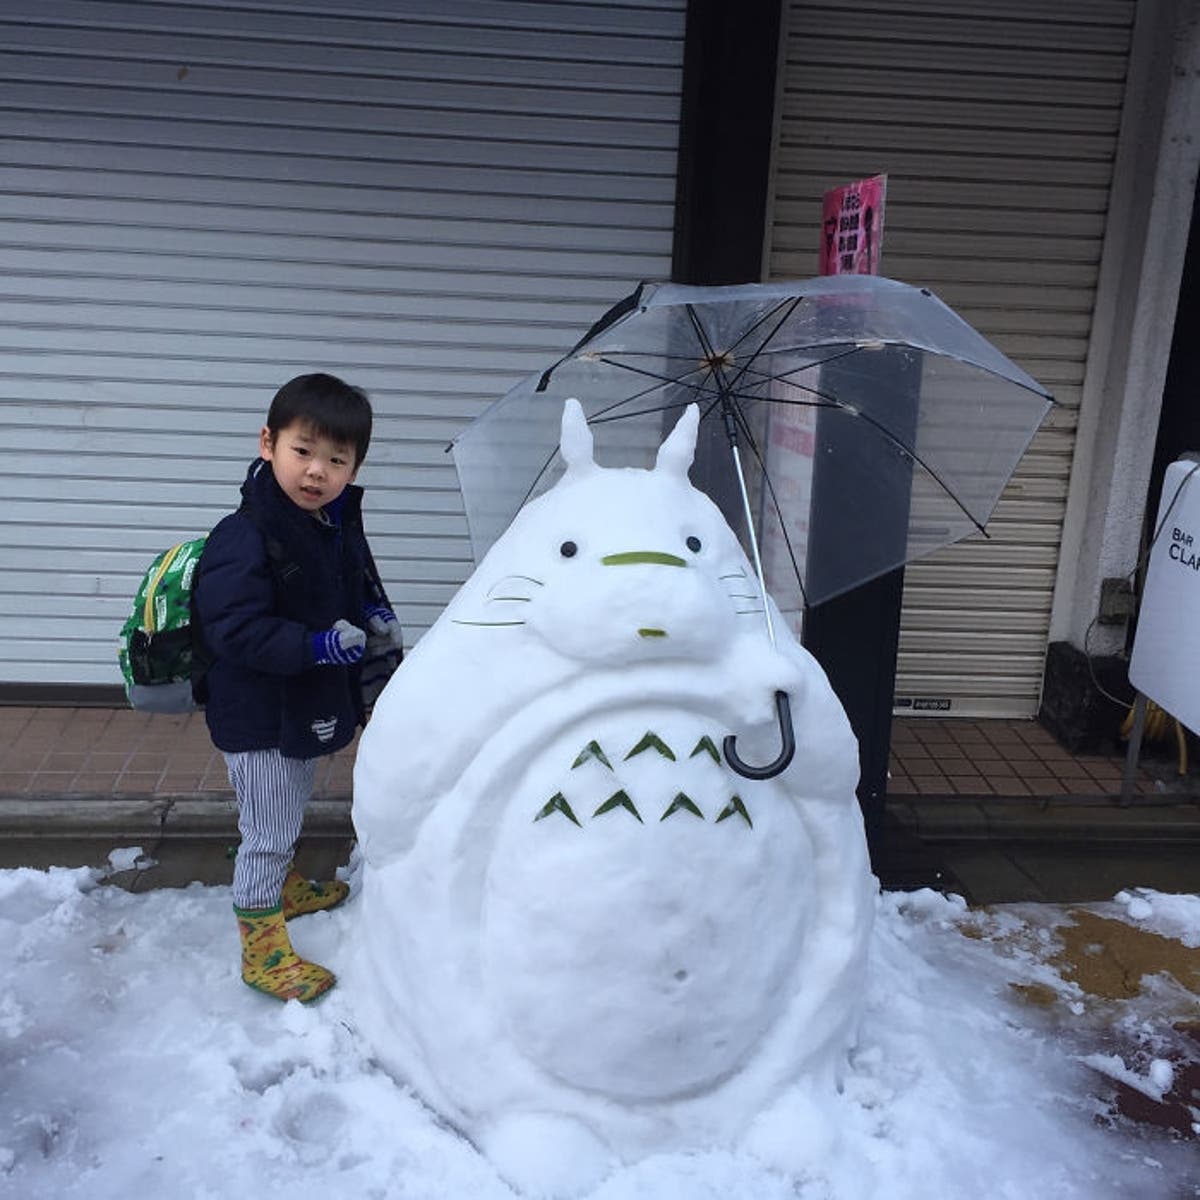 boy standing next to a snow sculpture in the form of the character Totoro